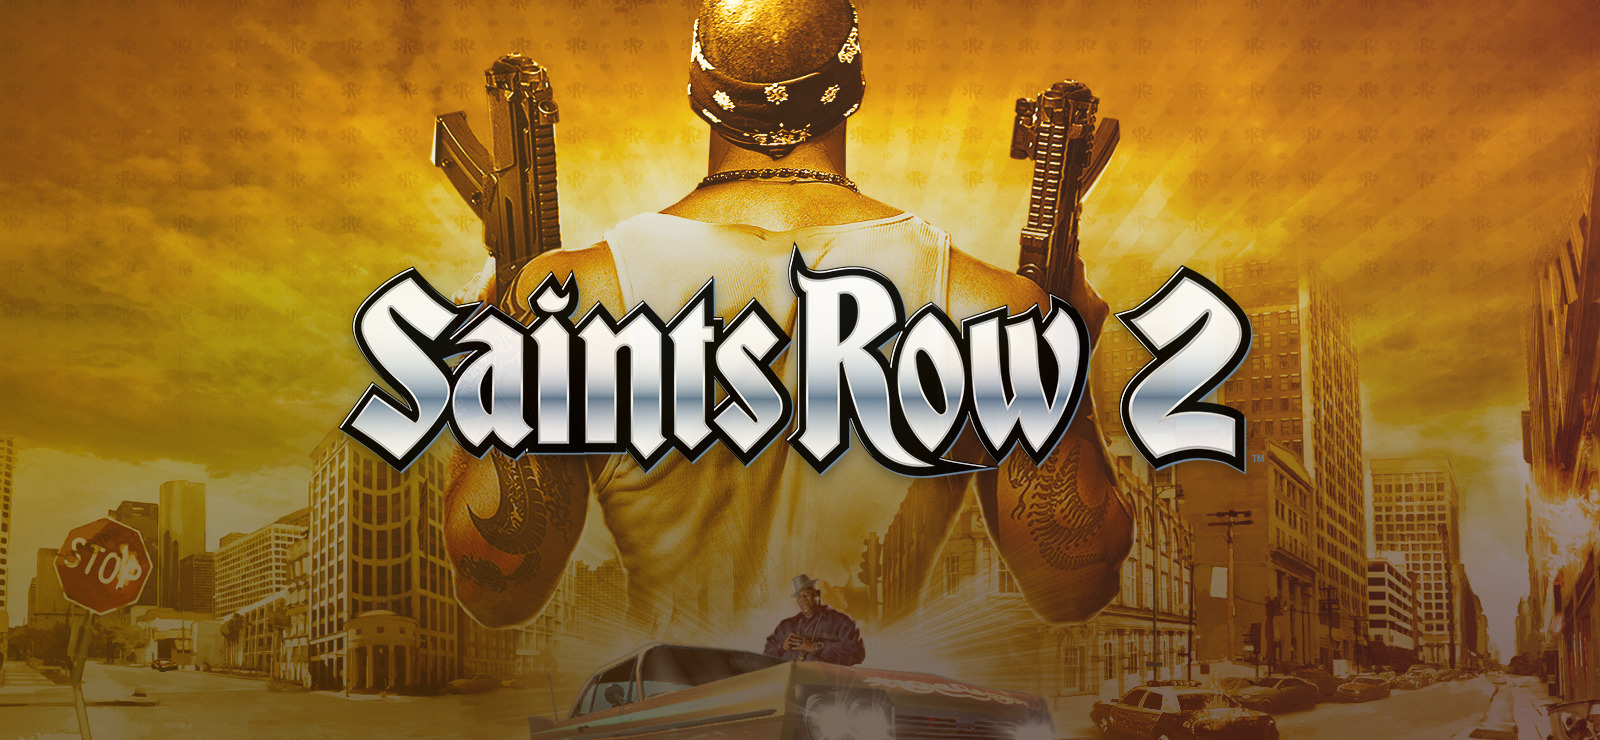 download saints row 2 for free